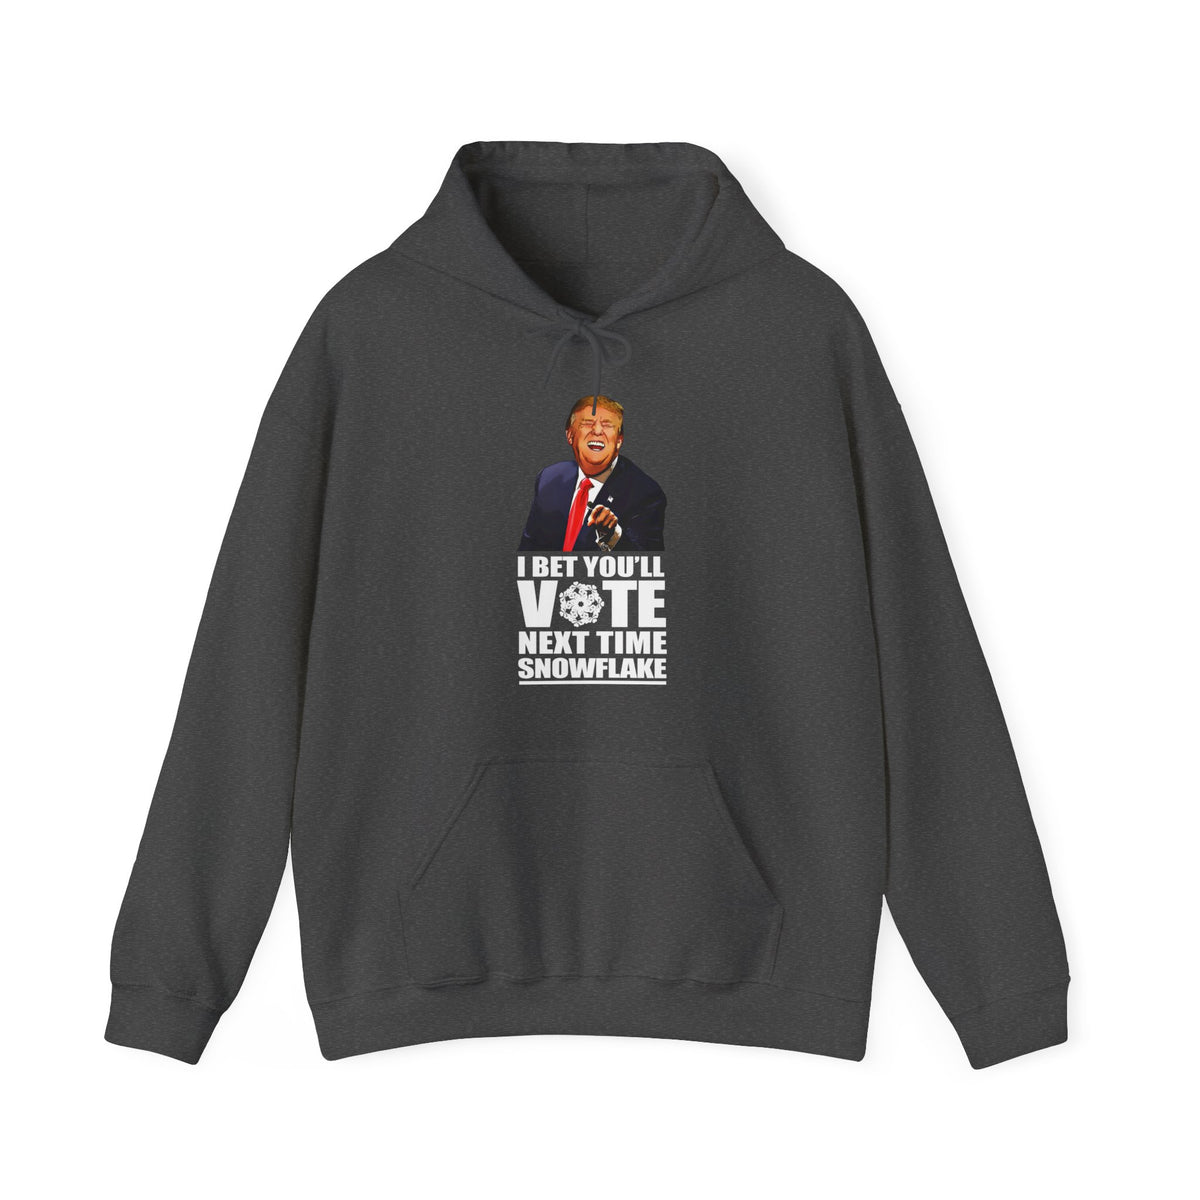 I Bet You'll Vote Next Time Snowflake (Donald Trump) - Hoodie